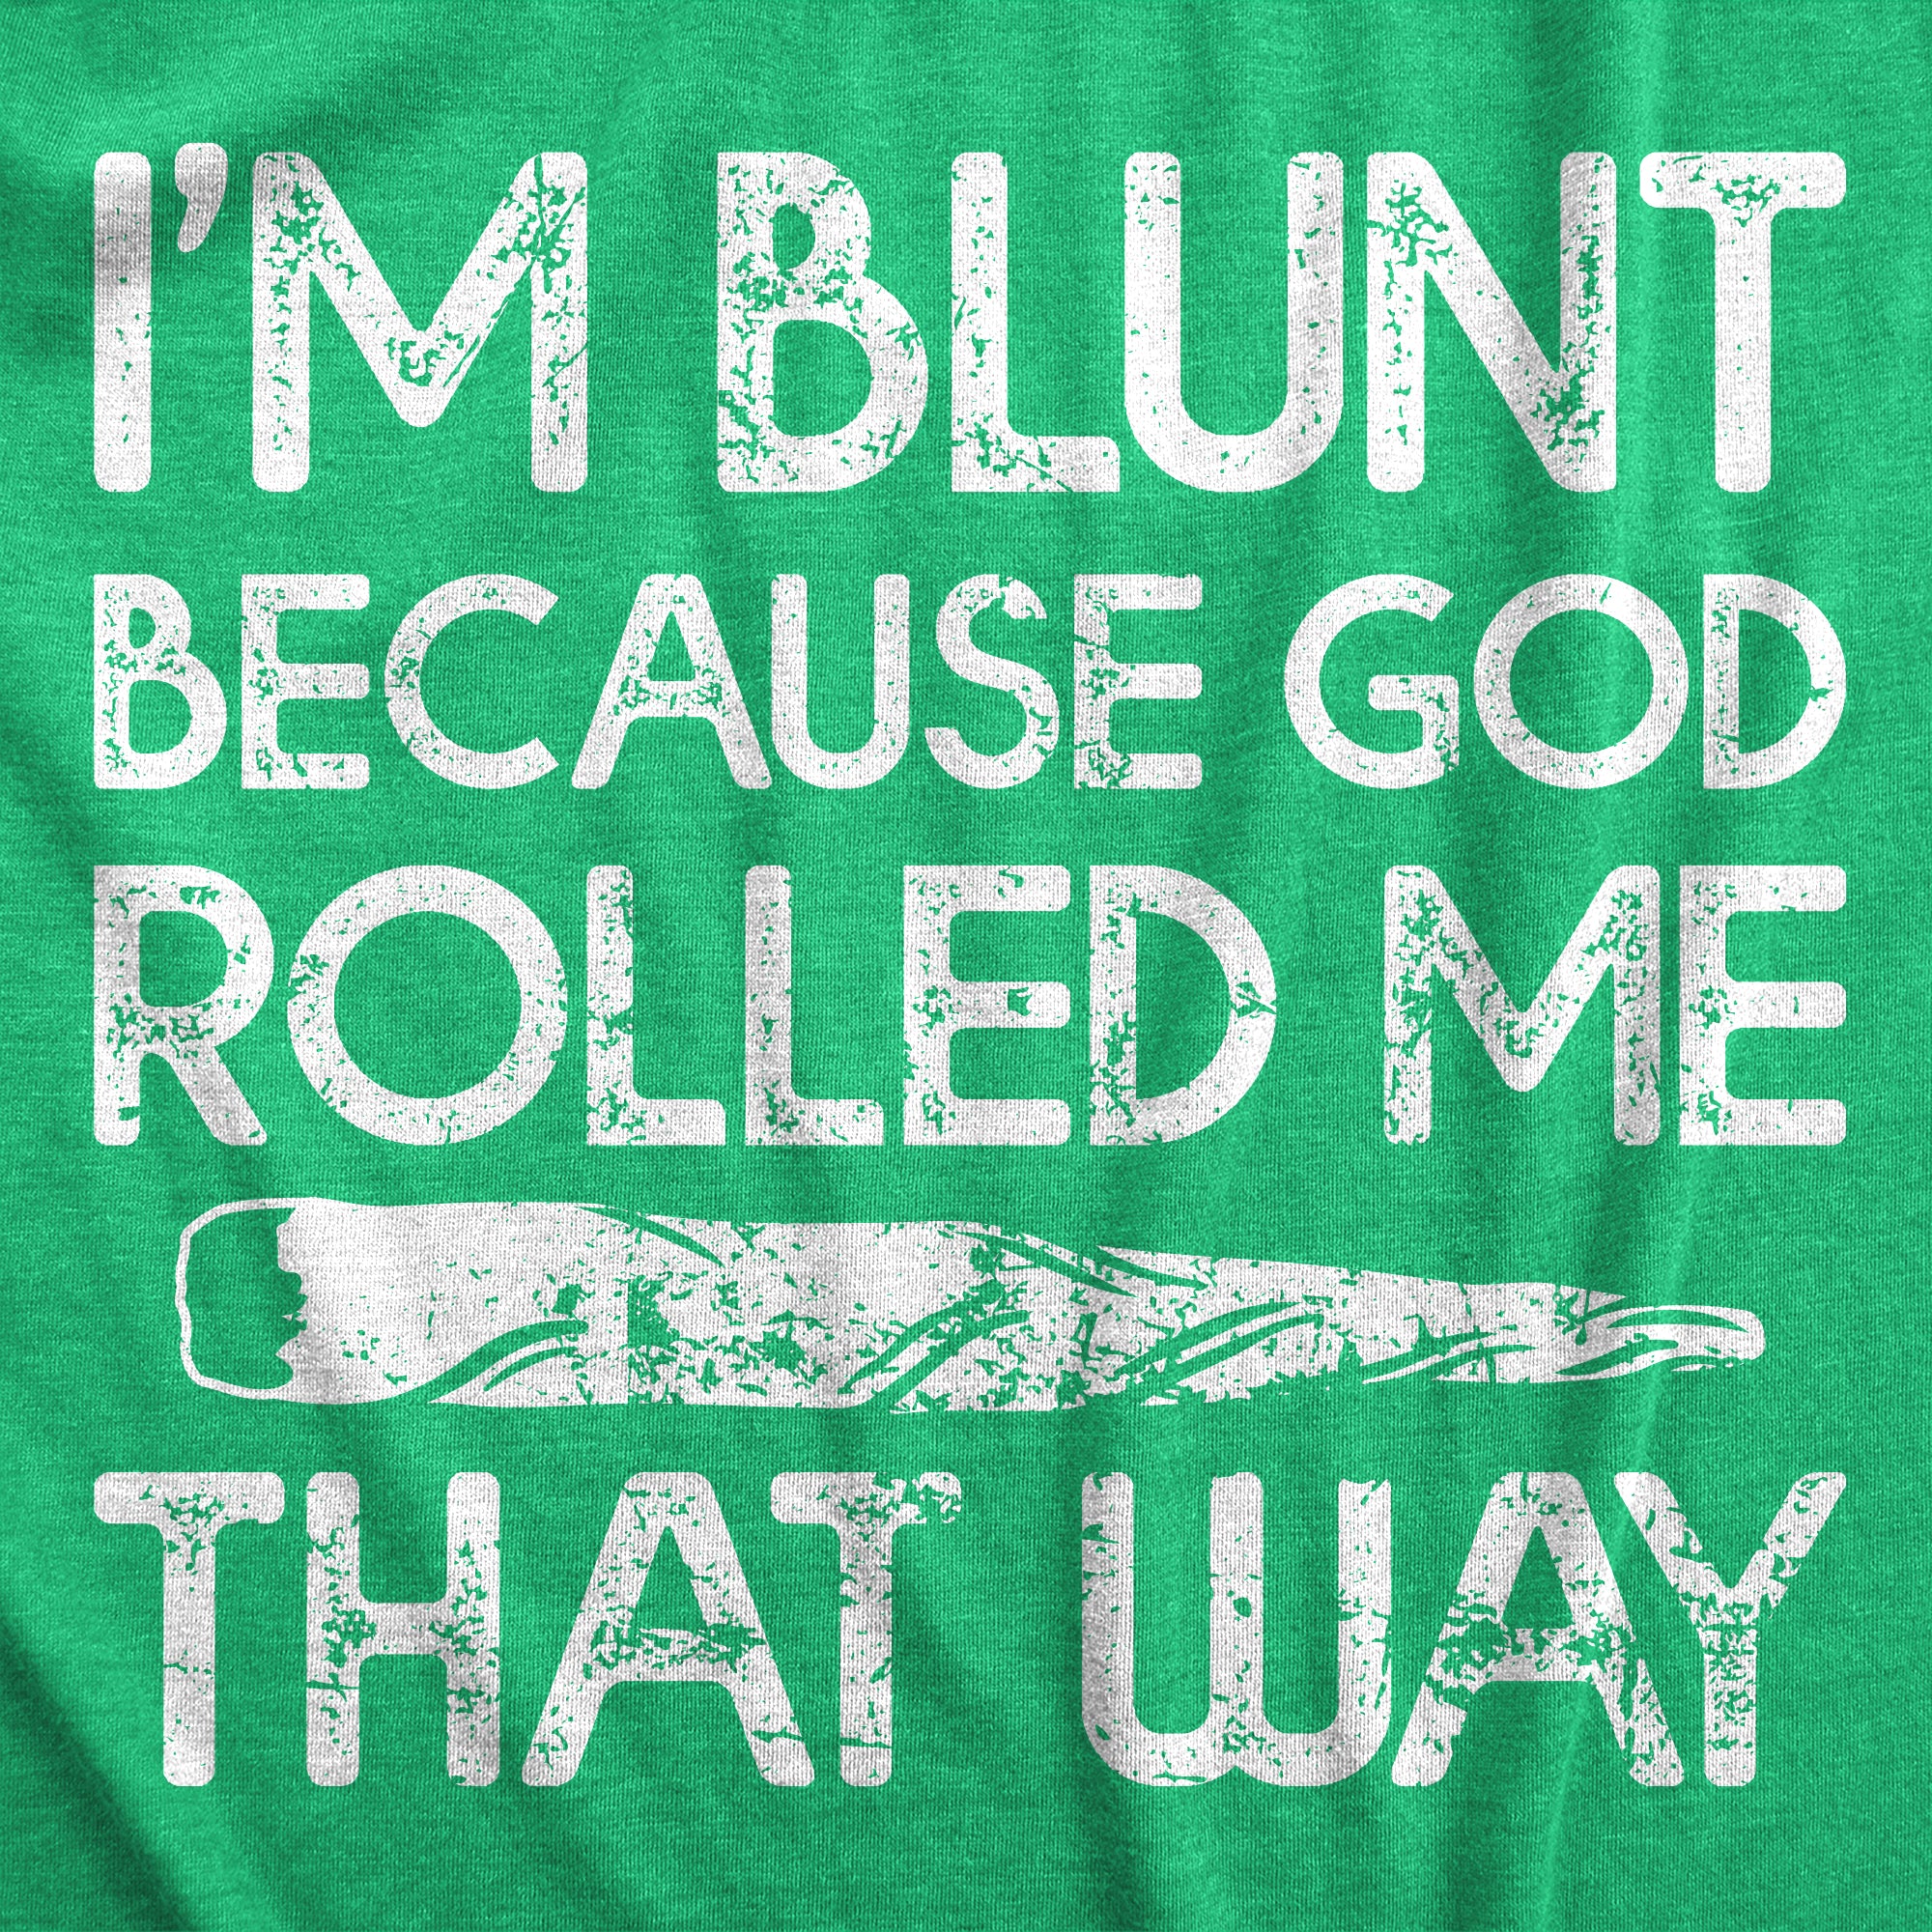 Funny Heather Green - God Rolled Me That Way Im Blunt Because God Rolled Me That Way Womens T Shirt Nerdy 420 sarcastic Tee